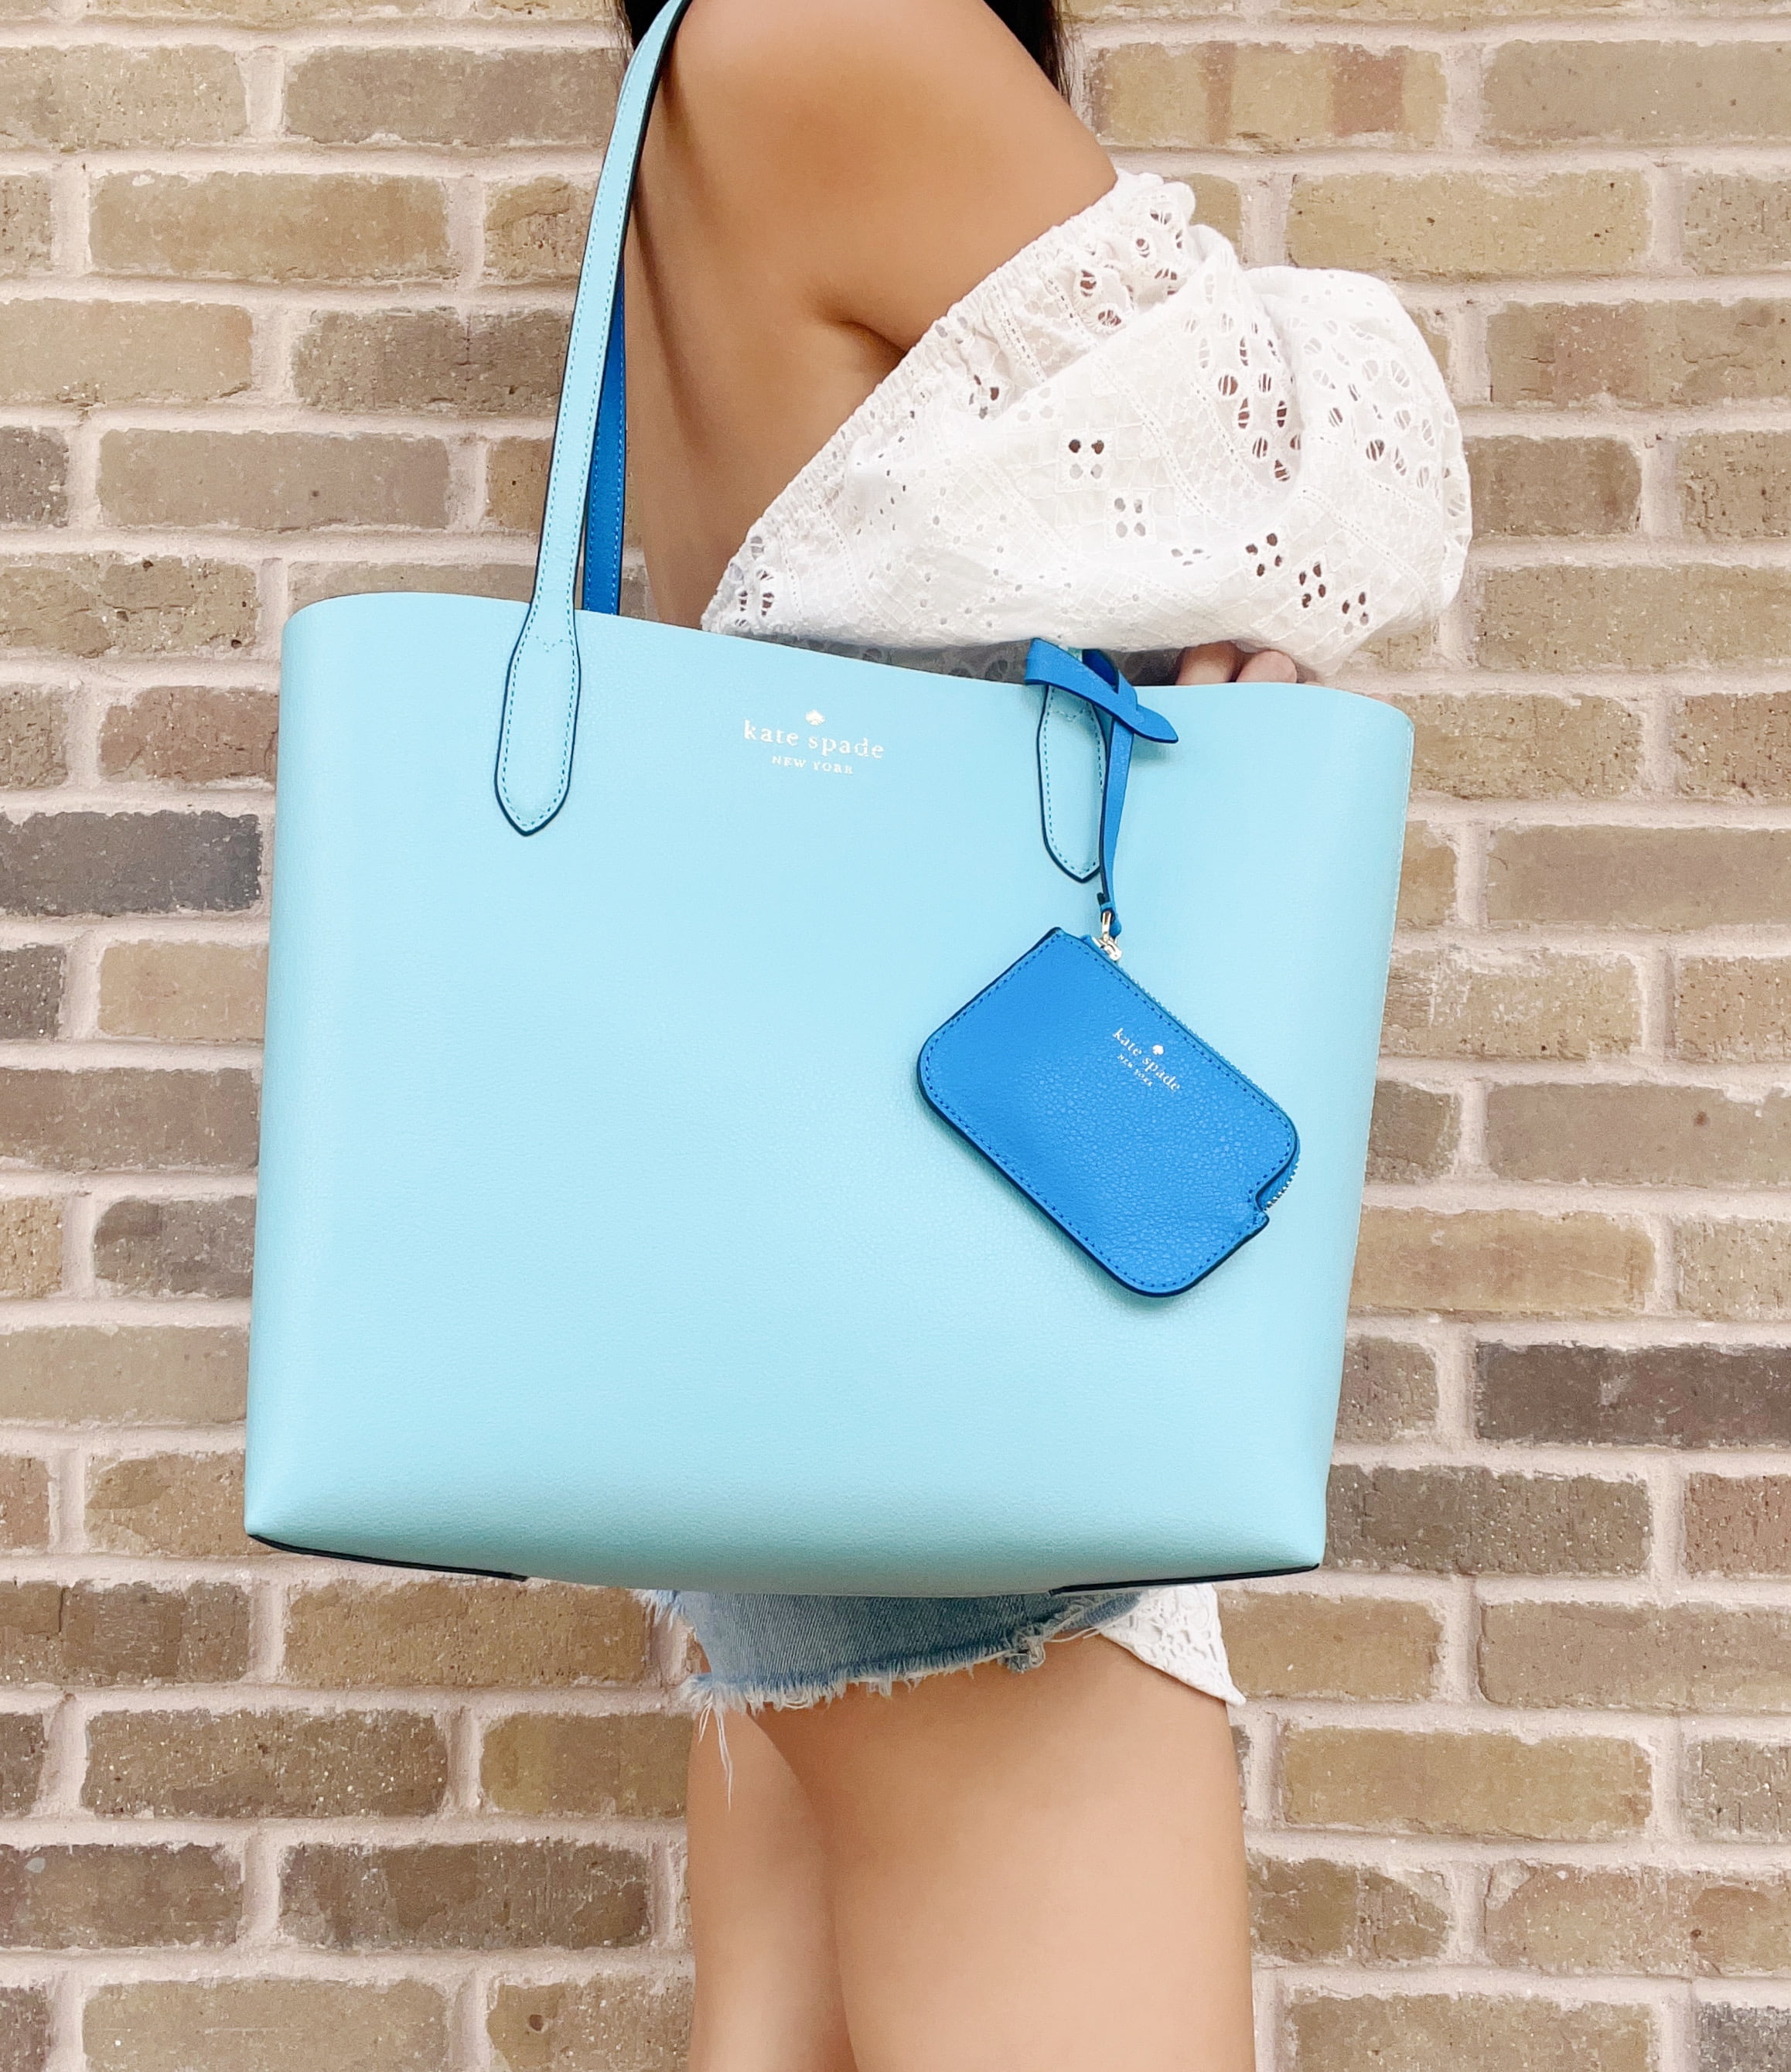 kate spade | Bags | Like New Kate Spade Purse Light Blue With Bow Decal On  Front | Poshmark